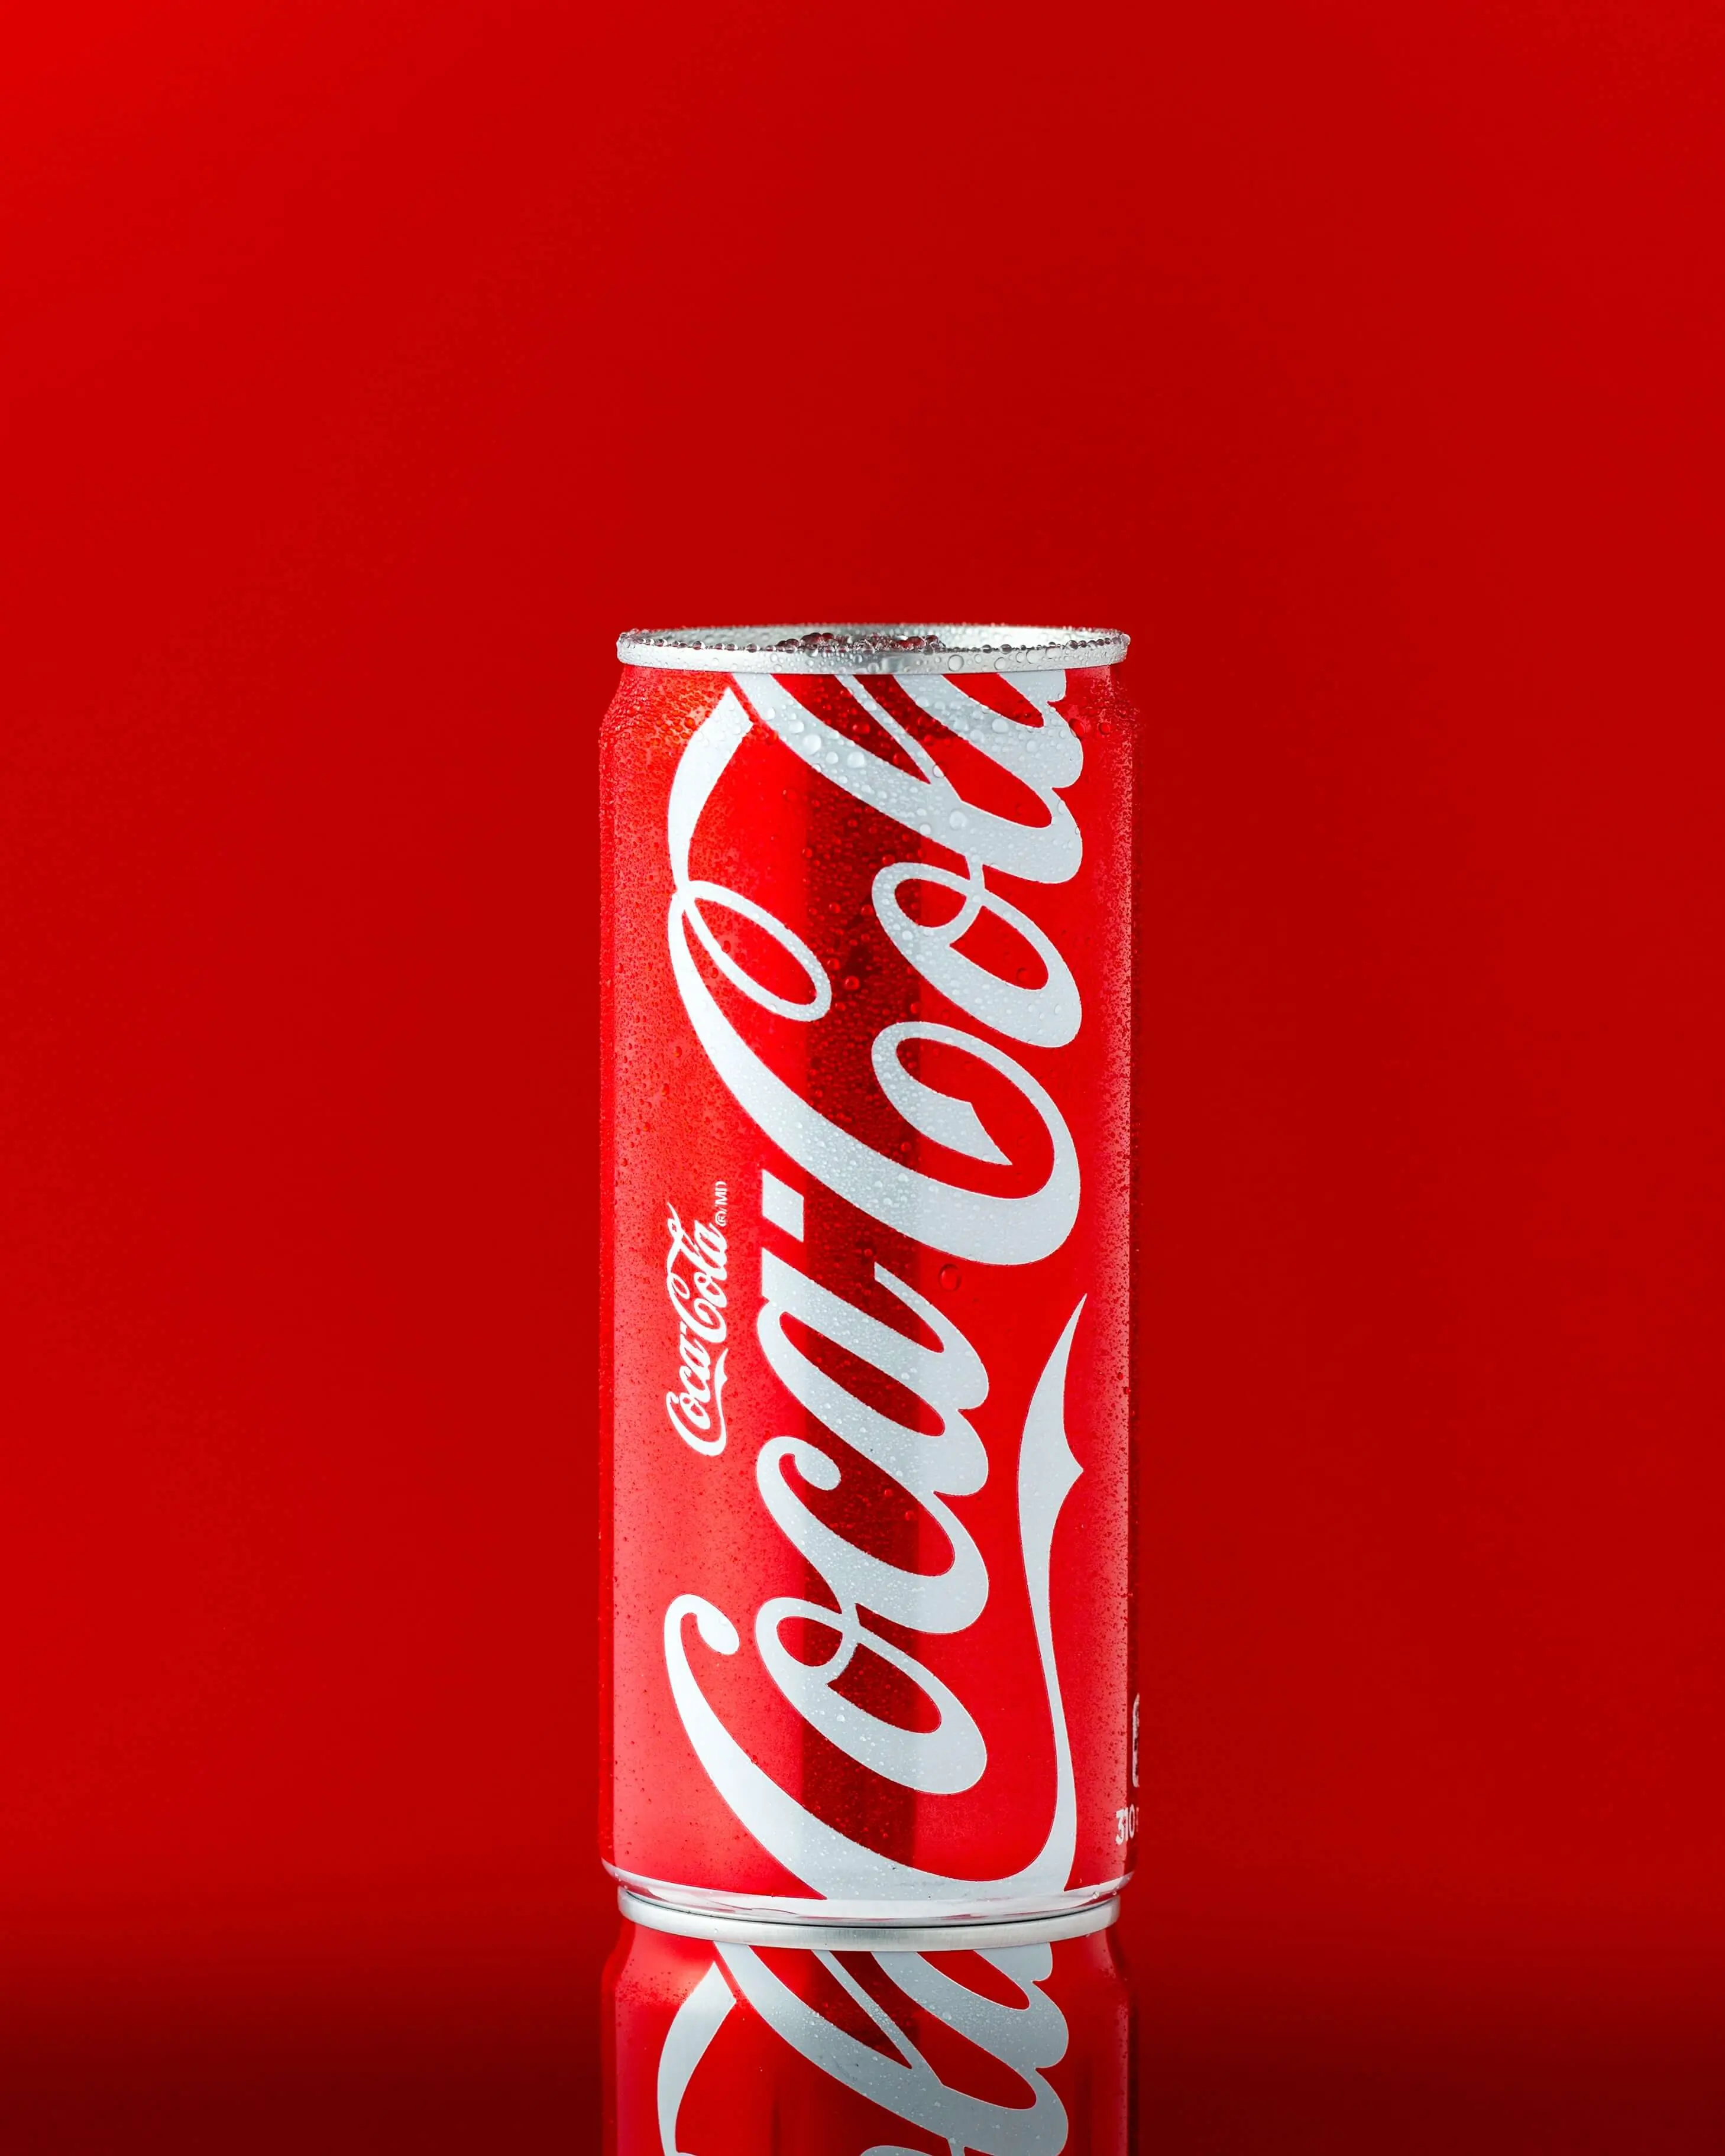 Photo of a Coca Cola can on a red background